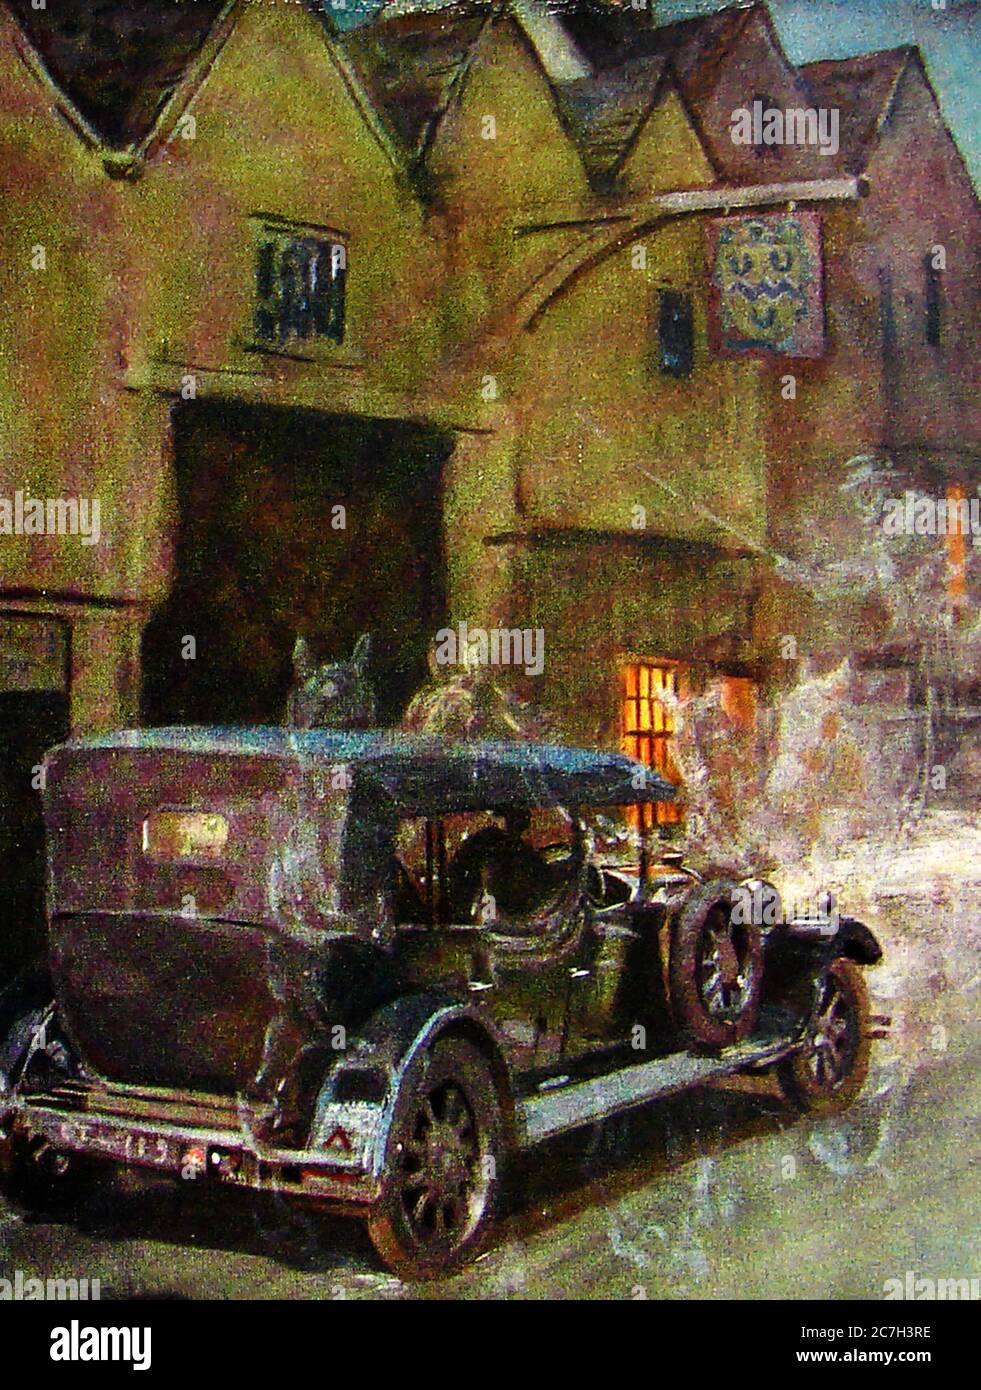 Ghosts of the days of coaching  - An old illustration mourning the days before motor cars superseded the days of coaching,suggesting that the ghosts of that era were still strong at the old haunted coaching inns. Stock Photo